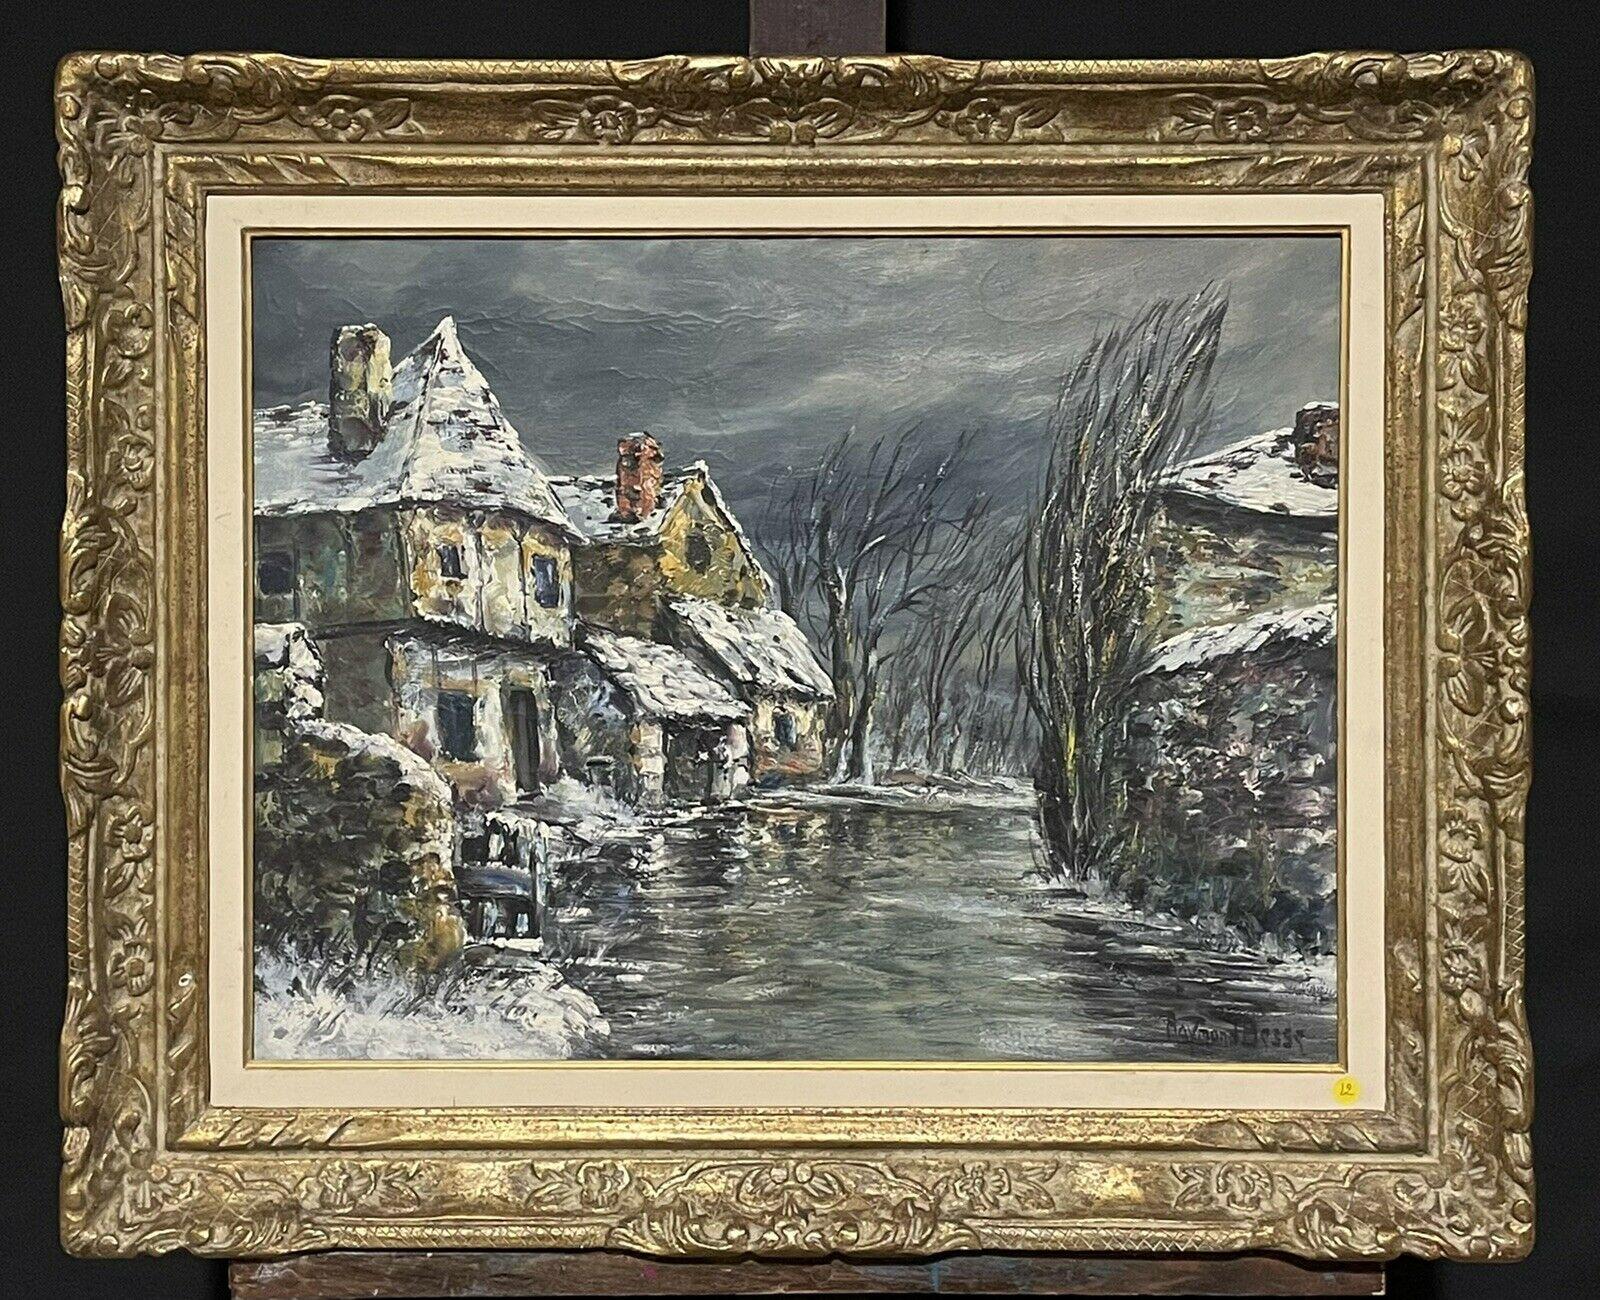 Raymond Besse Figurative Painting - 1950's French Village in Winter River Landscape Signed Impressionist Oil